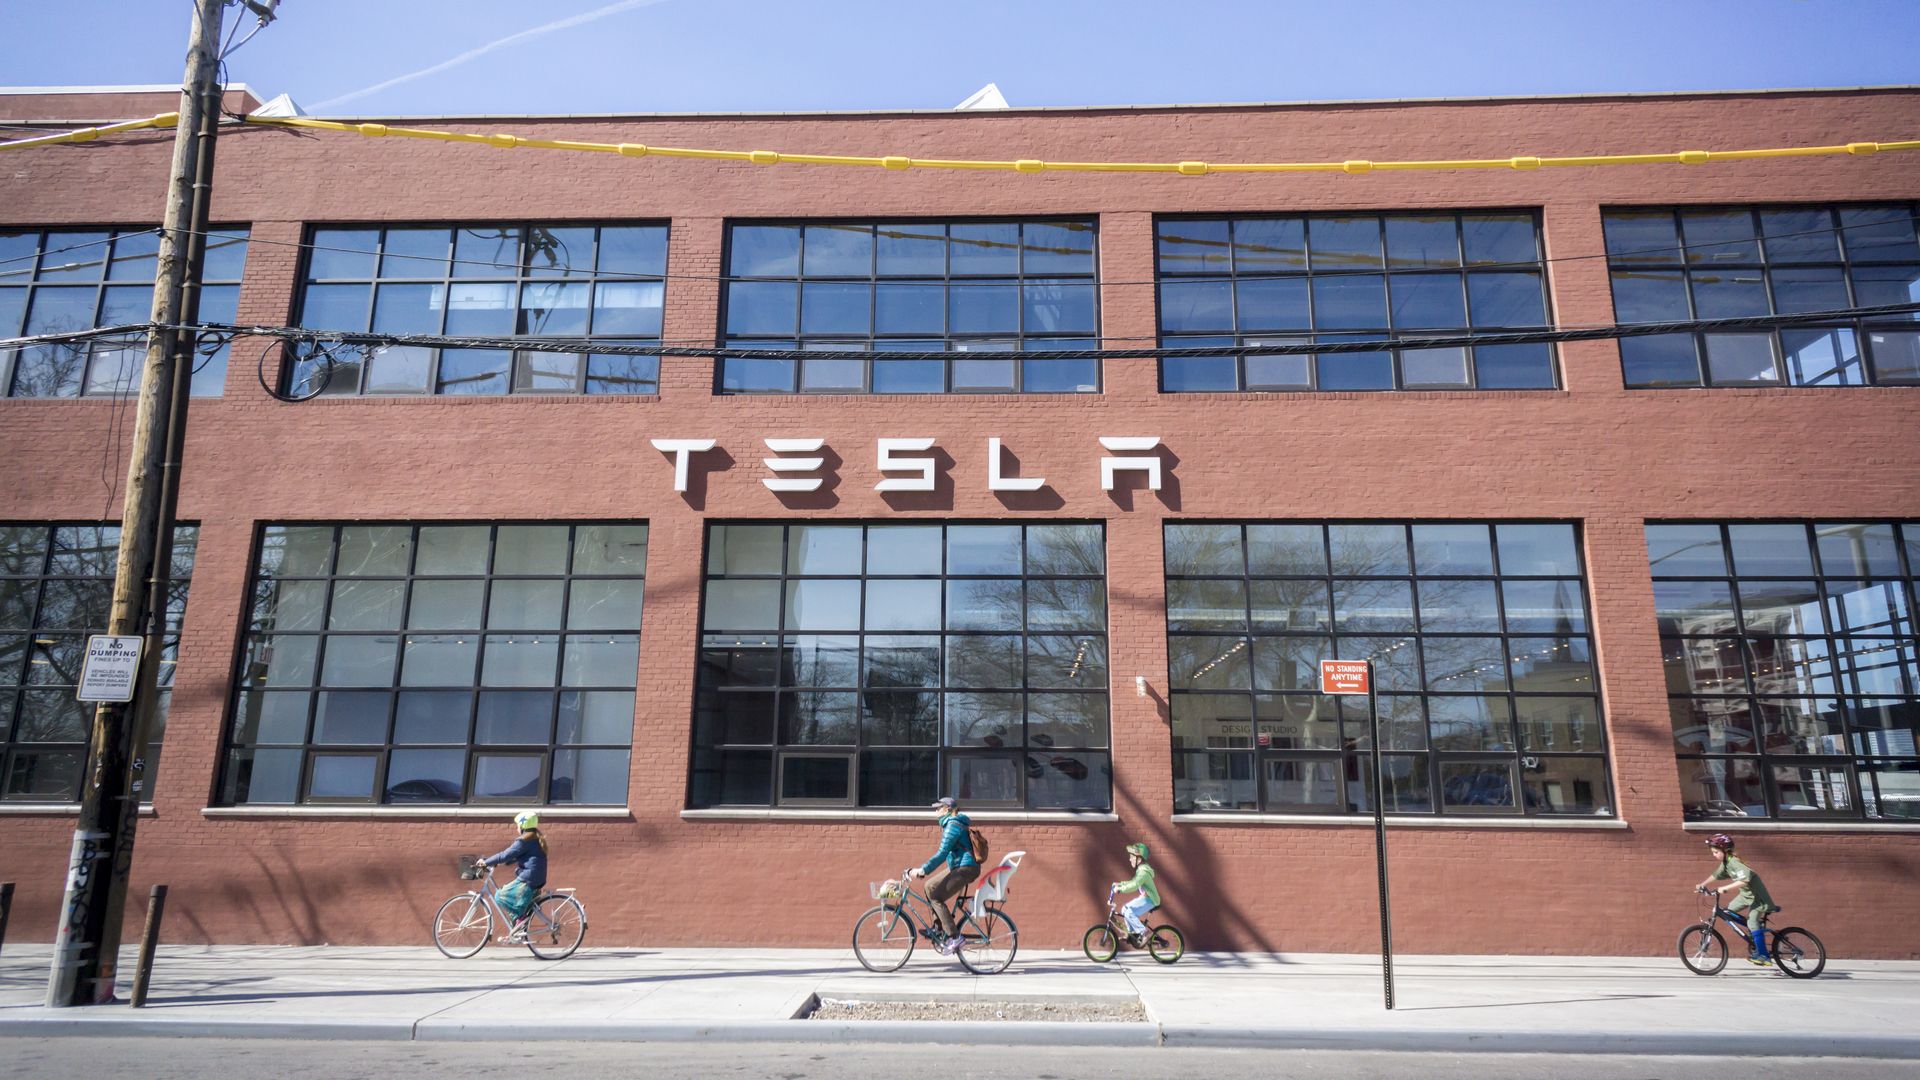 The new Tesla Motors showroom and service center in the Red Hook neighborhood of Brooklyn, New York.